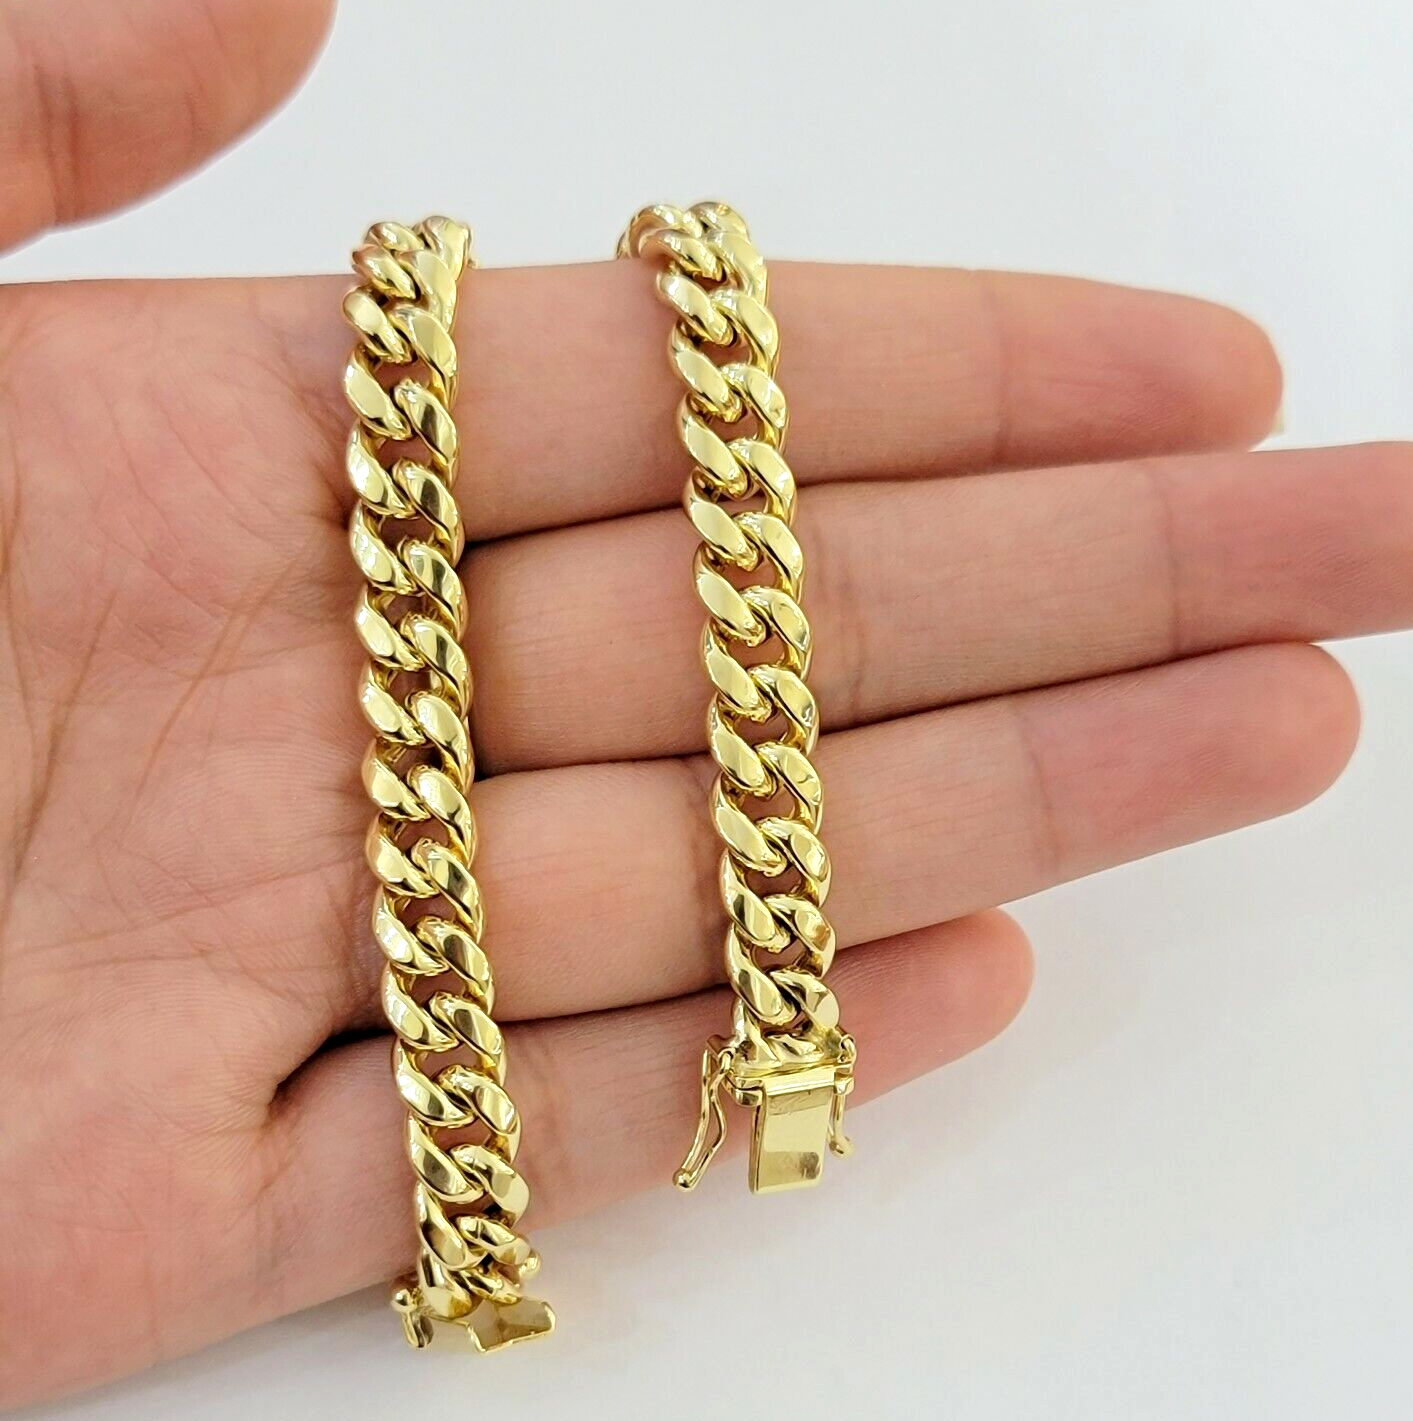 Real 10k Gold Bracelet 9 inch 8mm Miami Cuban Link Box Clasp Strong 10kt , Men's